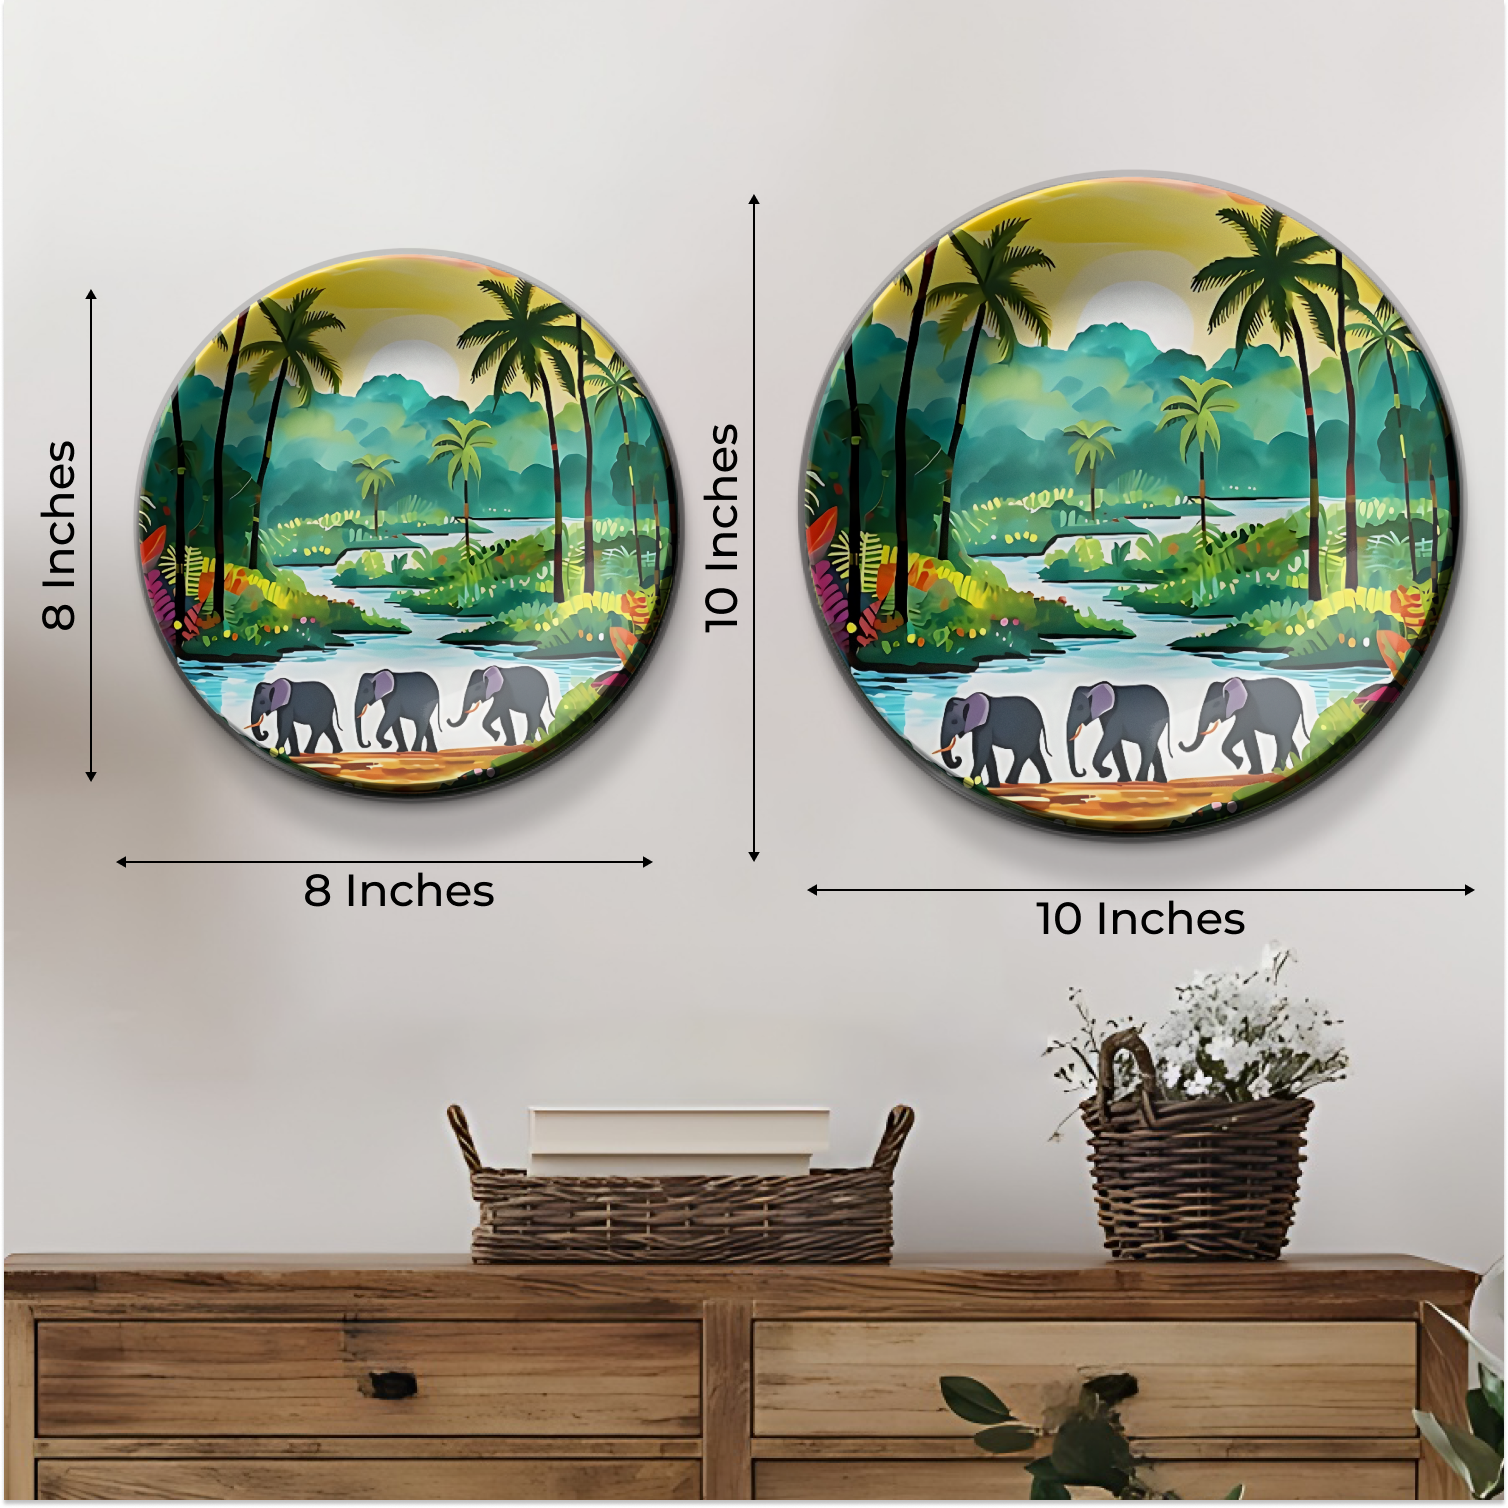 Authentic Set of 3 Assorted Theme Wall Plates Décor Reflecting Multicultural Heritage